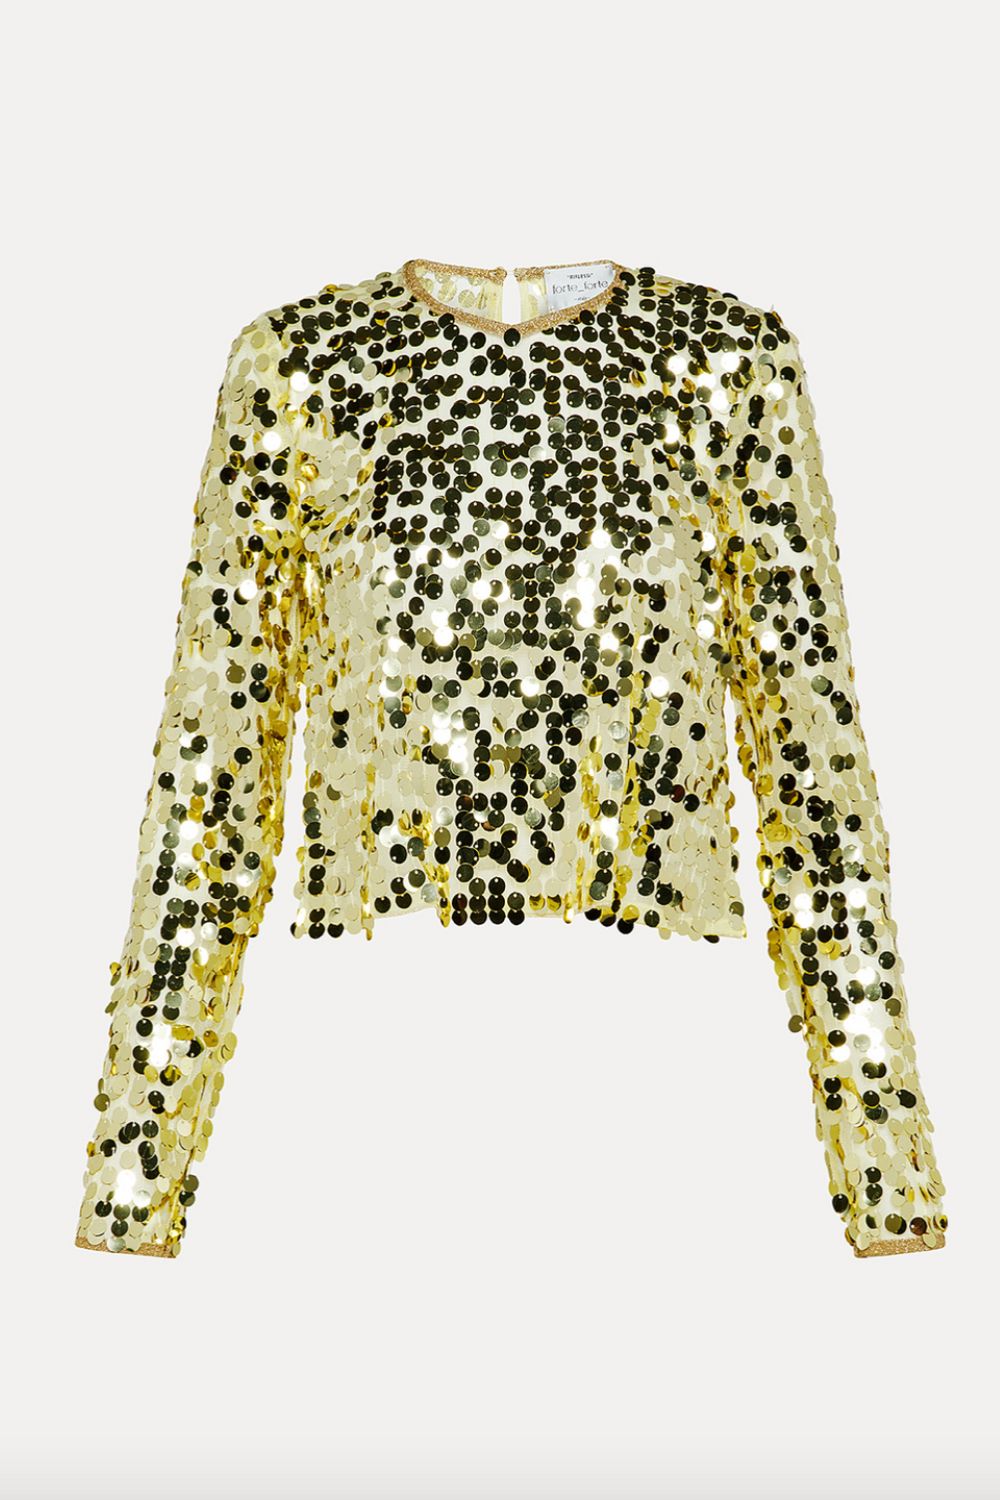 The-Gloss-Magazine-best-sparkly-tops-to-buy-now-4